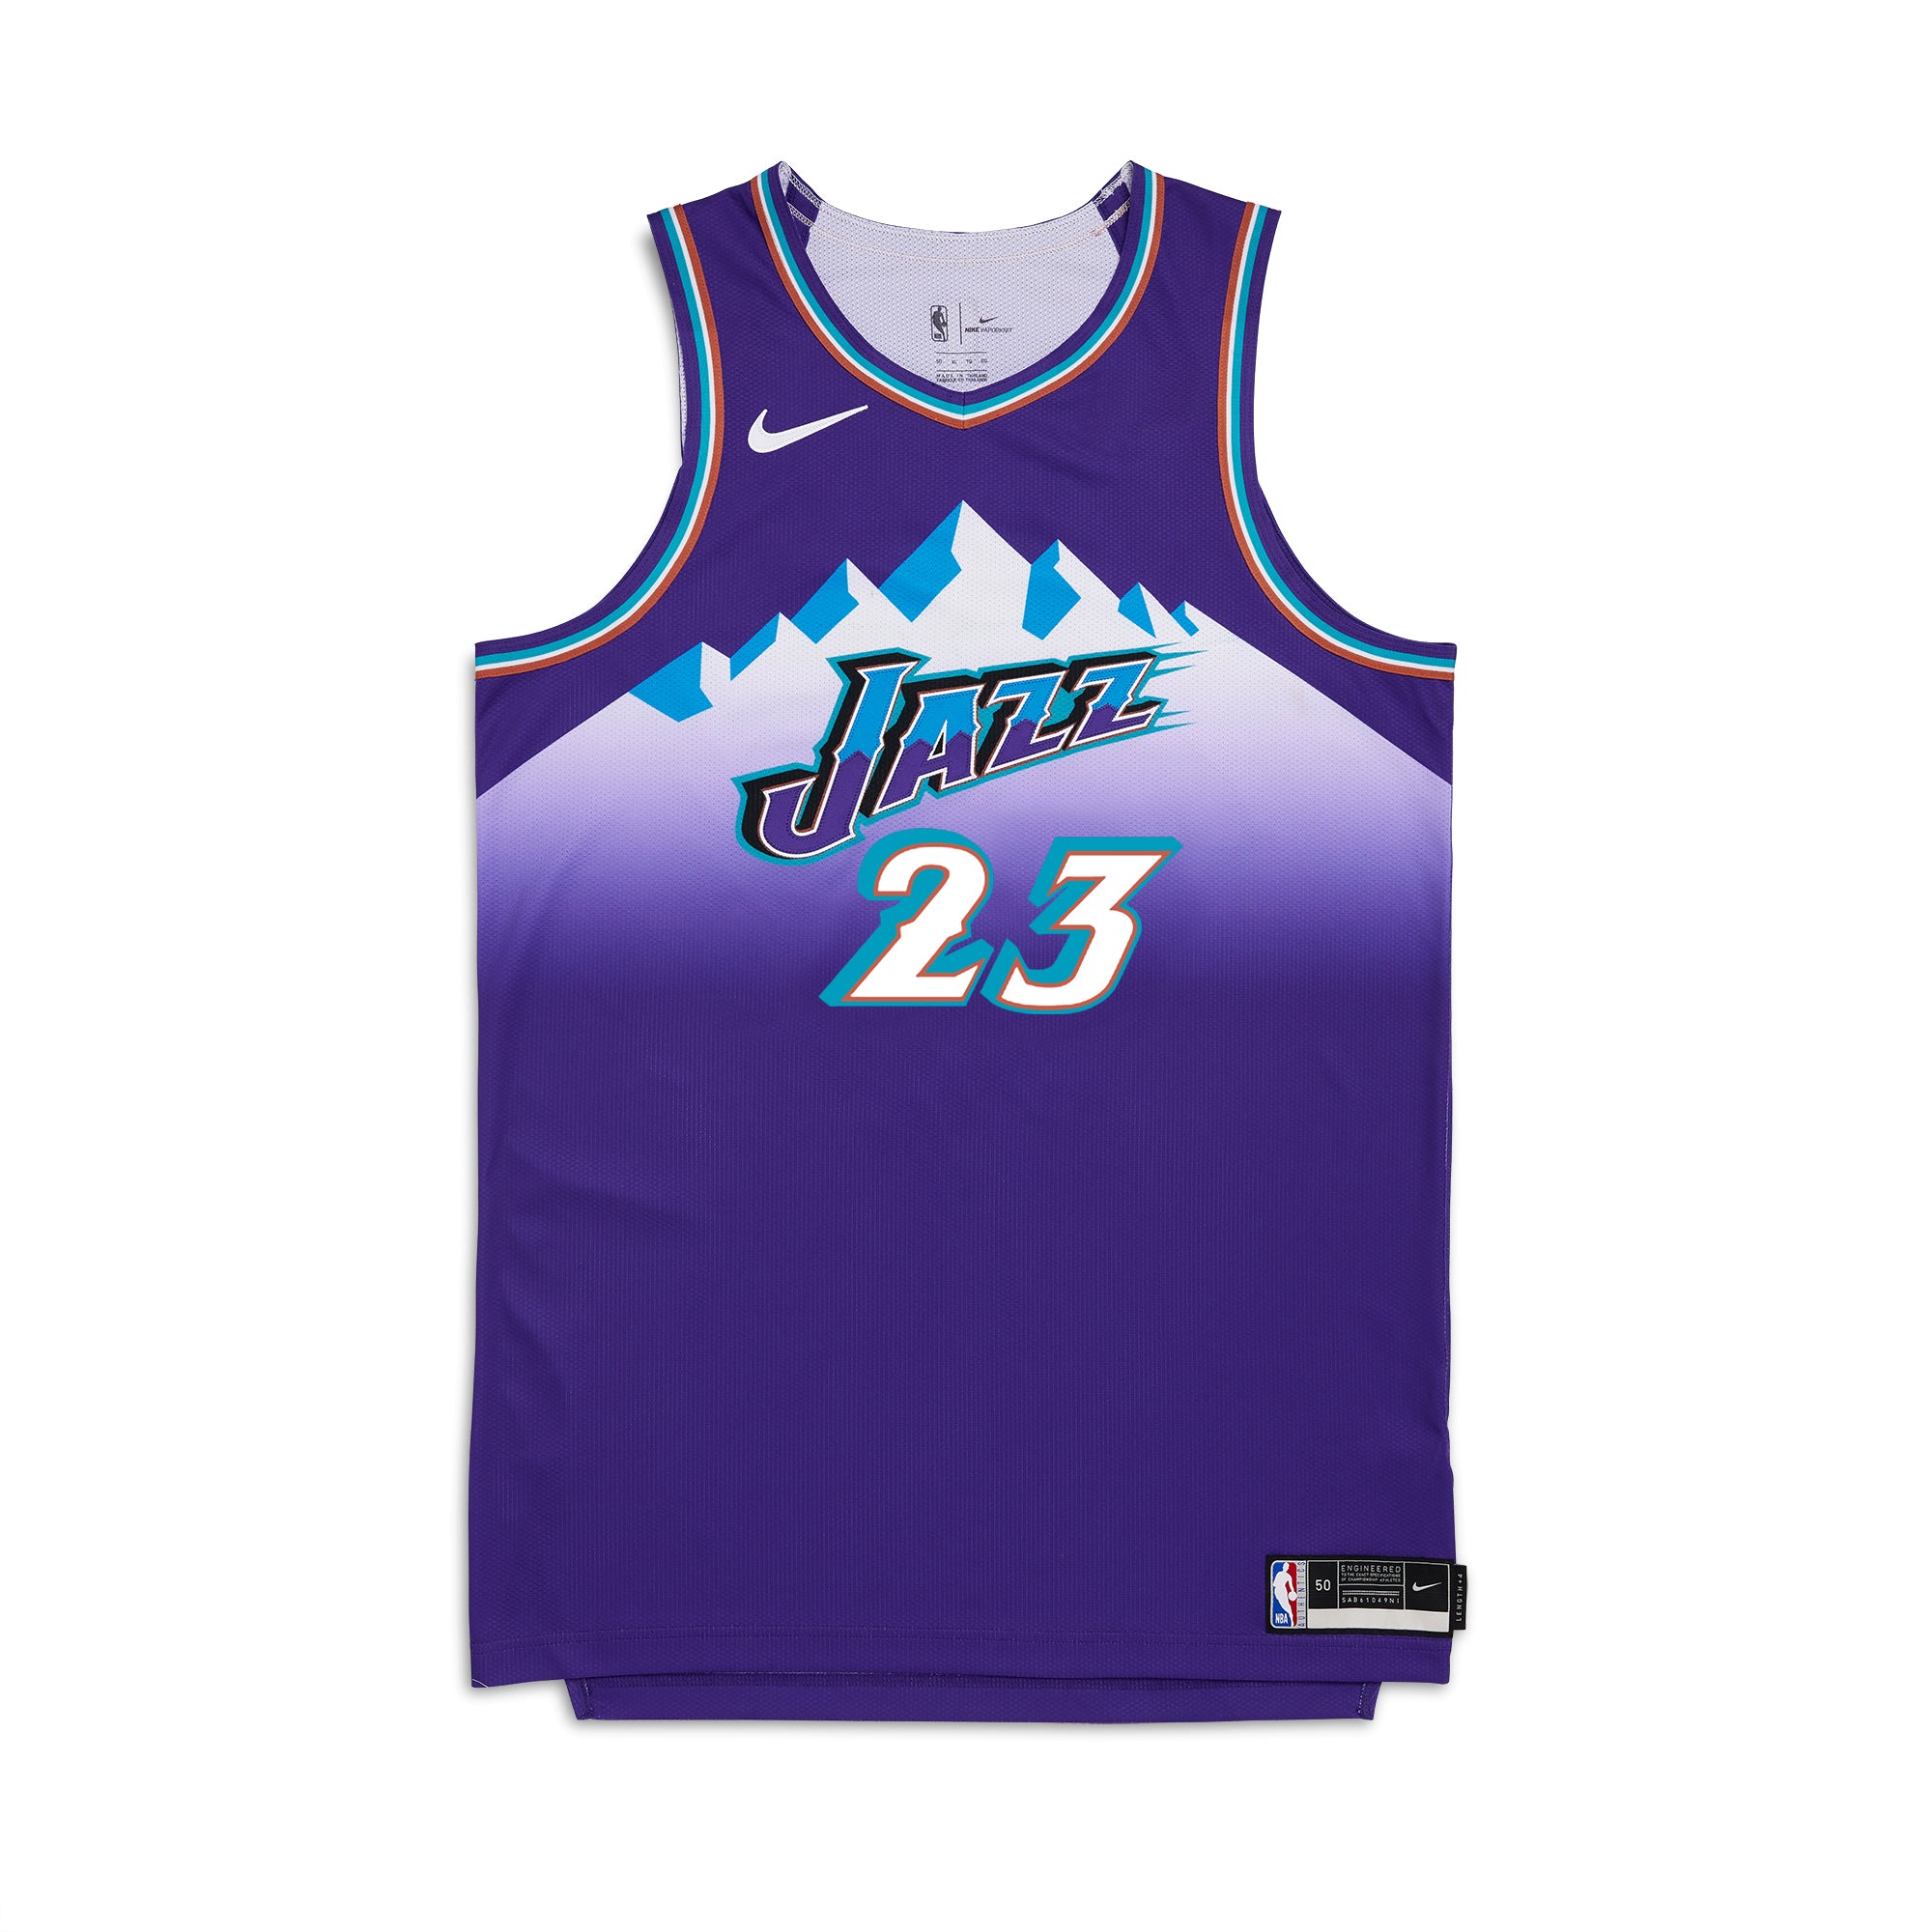 Buy Kids Size Nba Jersey Online In India -  India